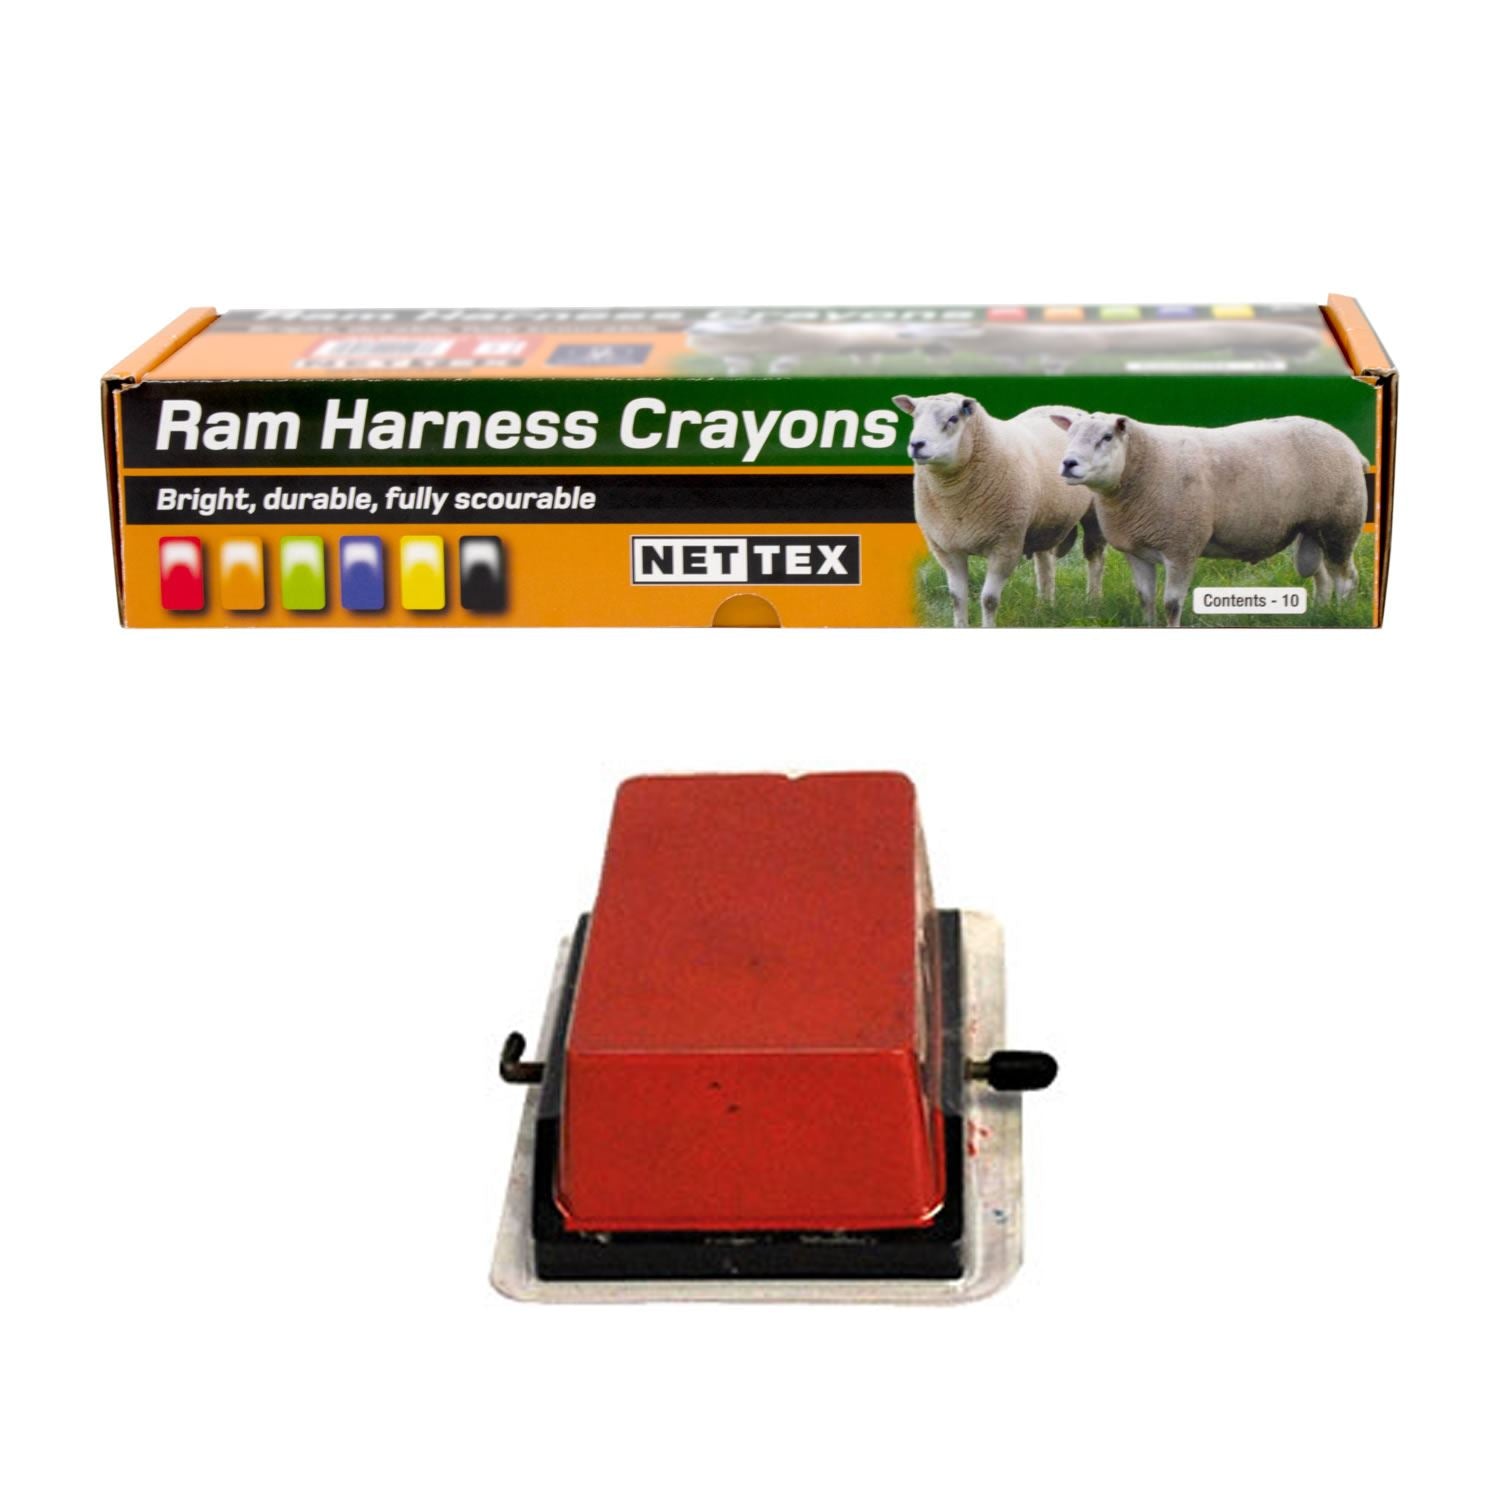 Nettex All Weather Crayons - Just Horse Riders